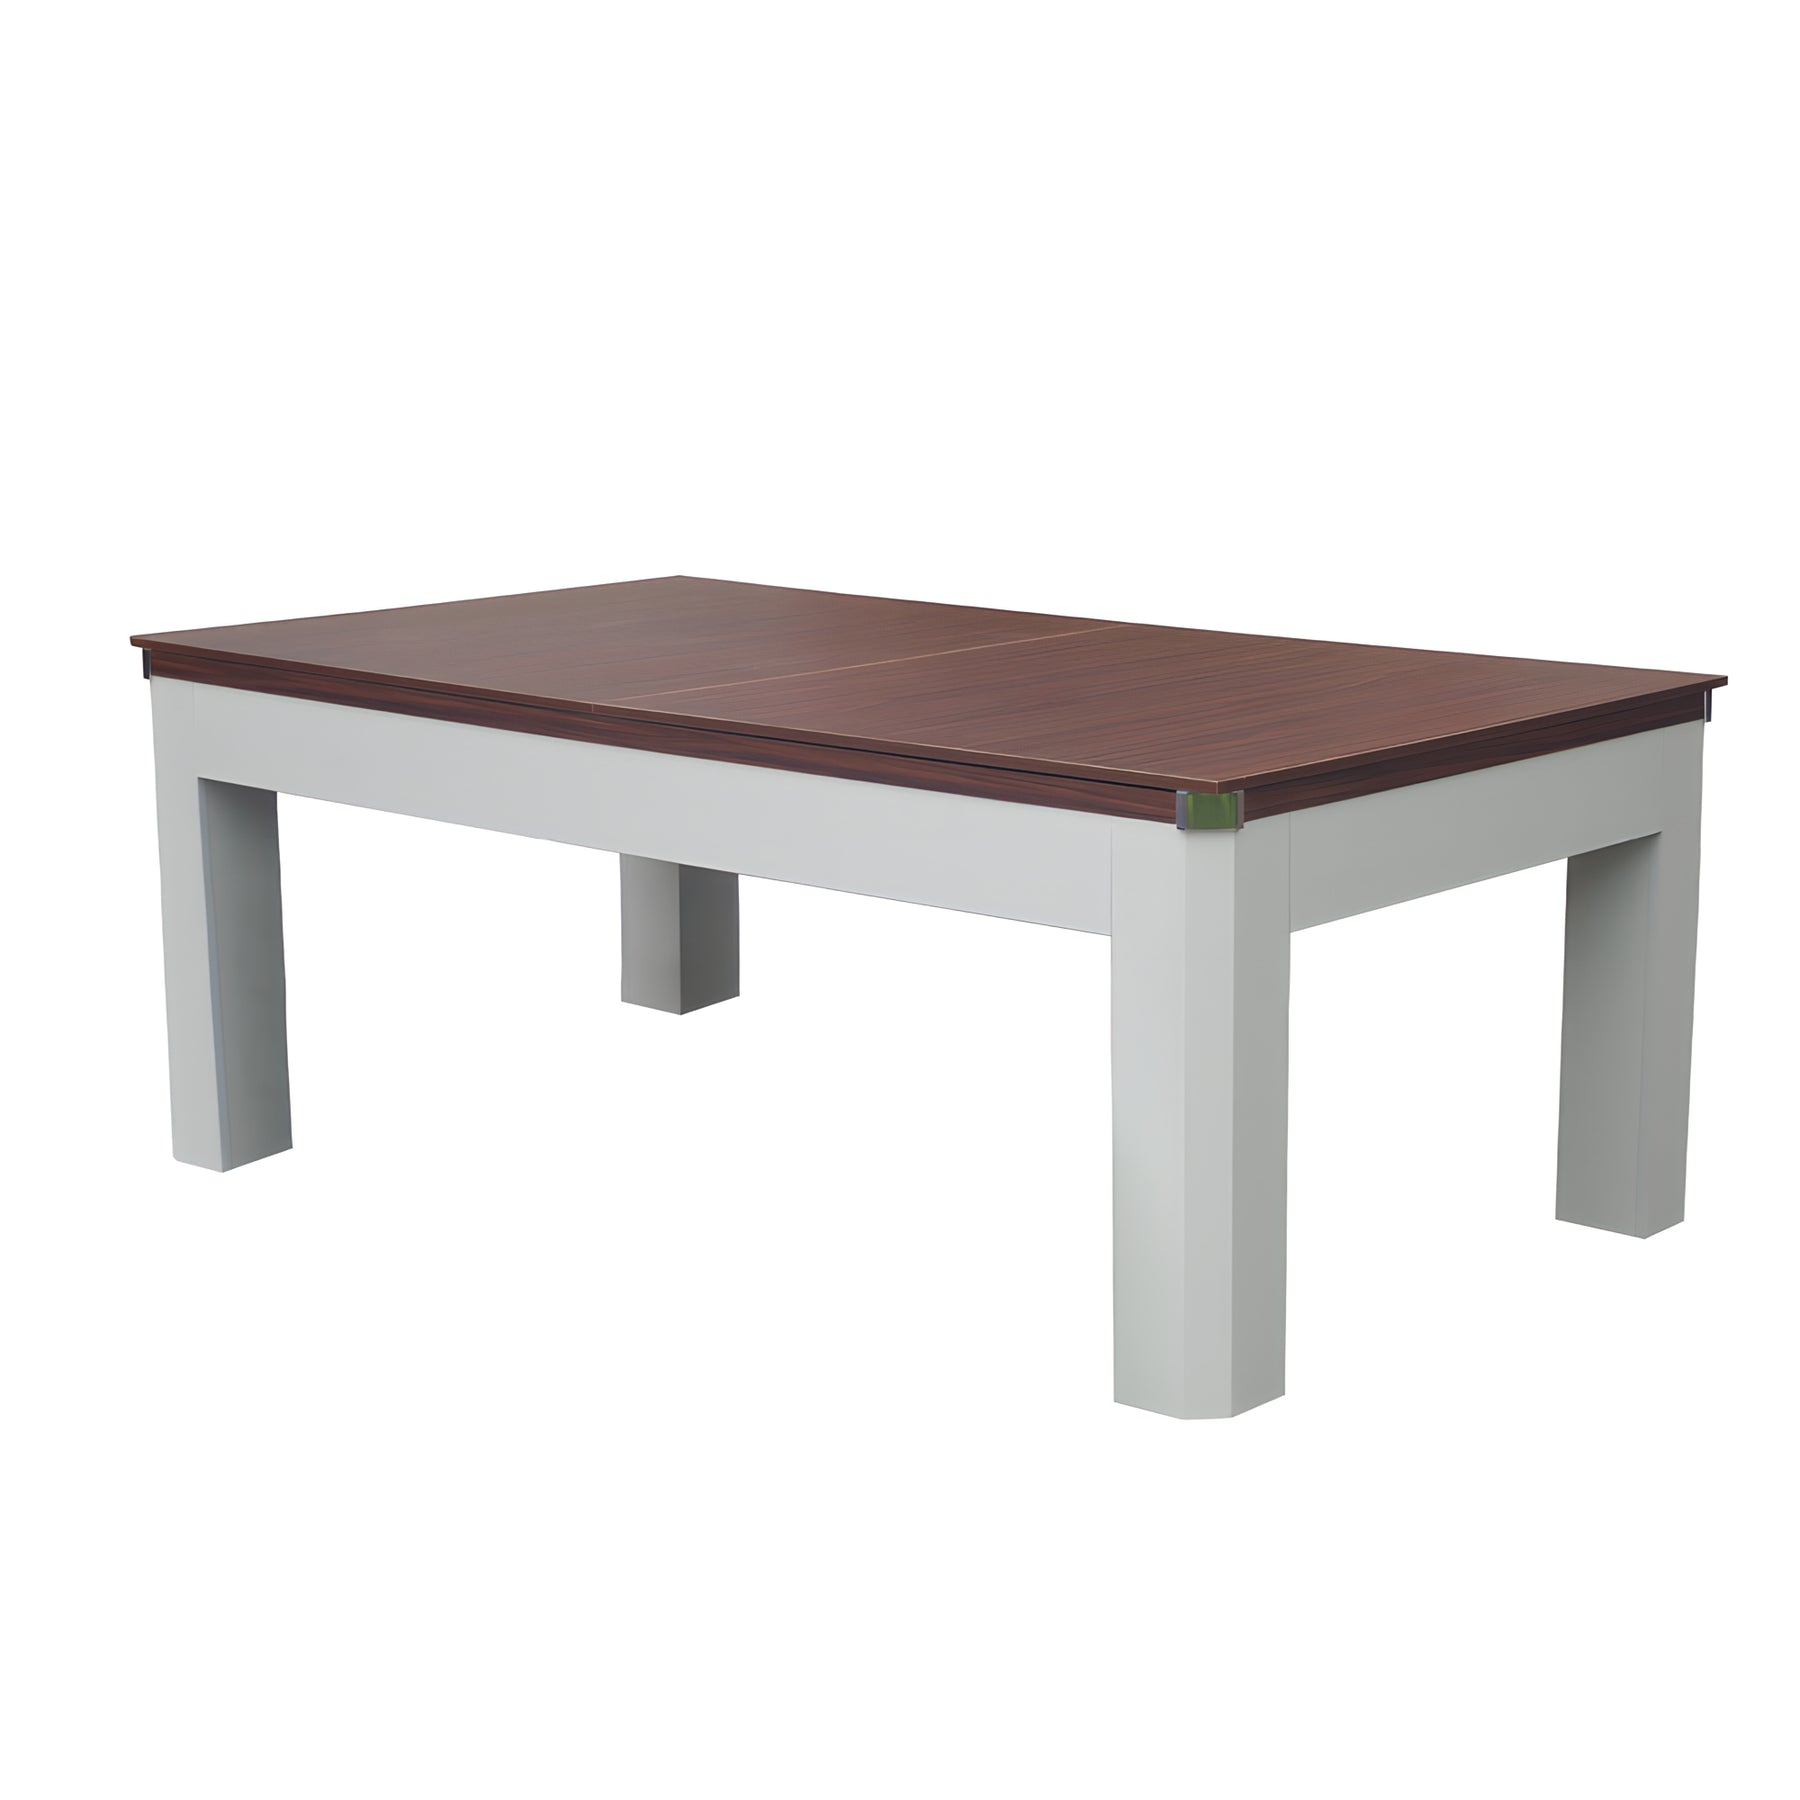 7FT 003 MDF 3-IN-1 Pool Table/Table Tennis Table/Dining Table White (ON BACK ORDER FOR 12 WEEKS FROM NOW)